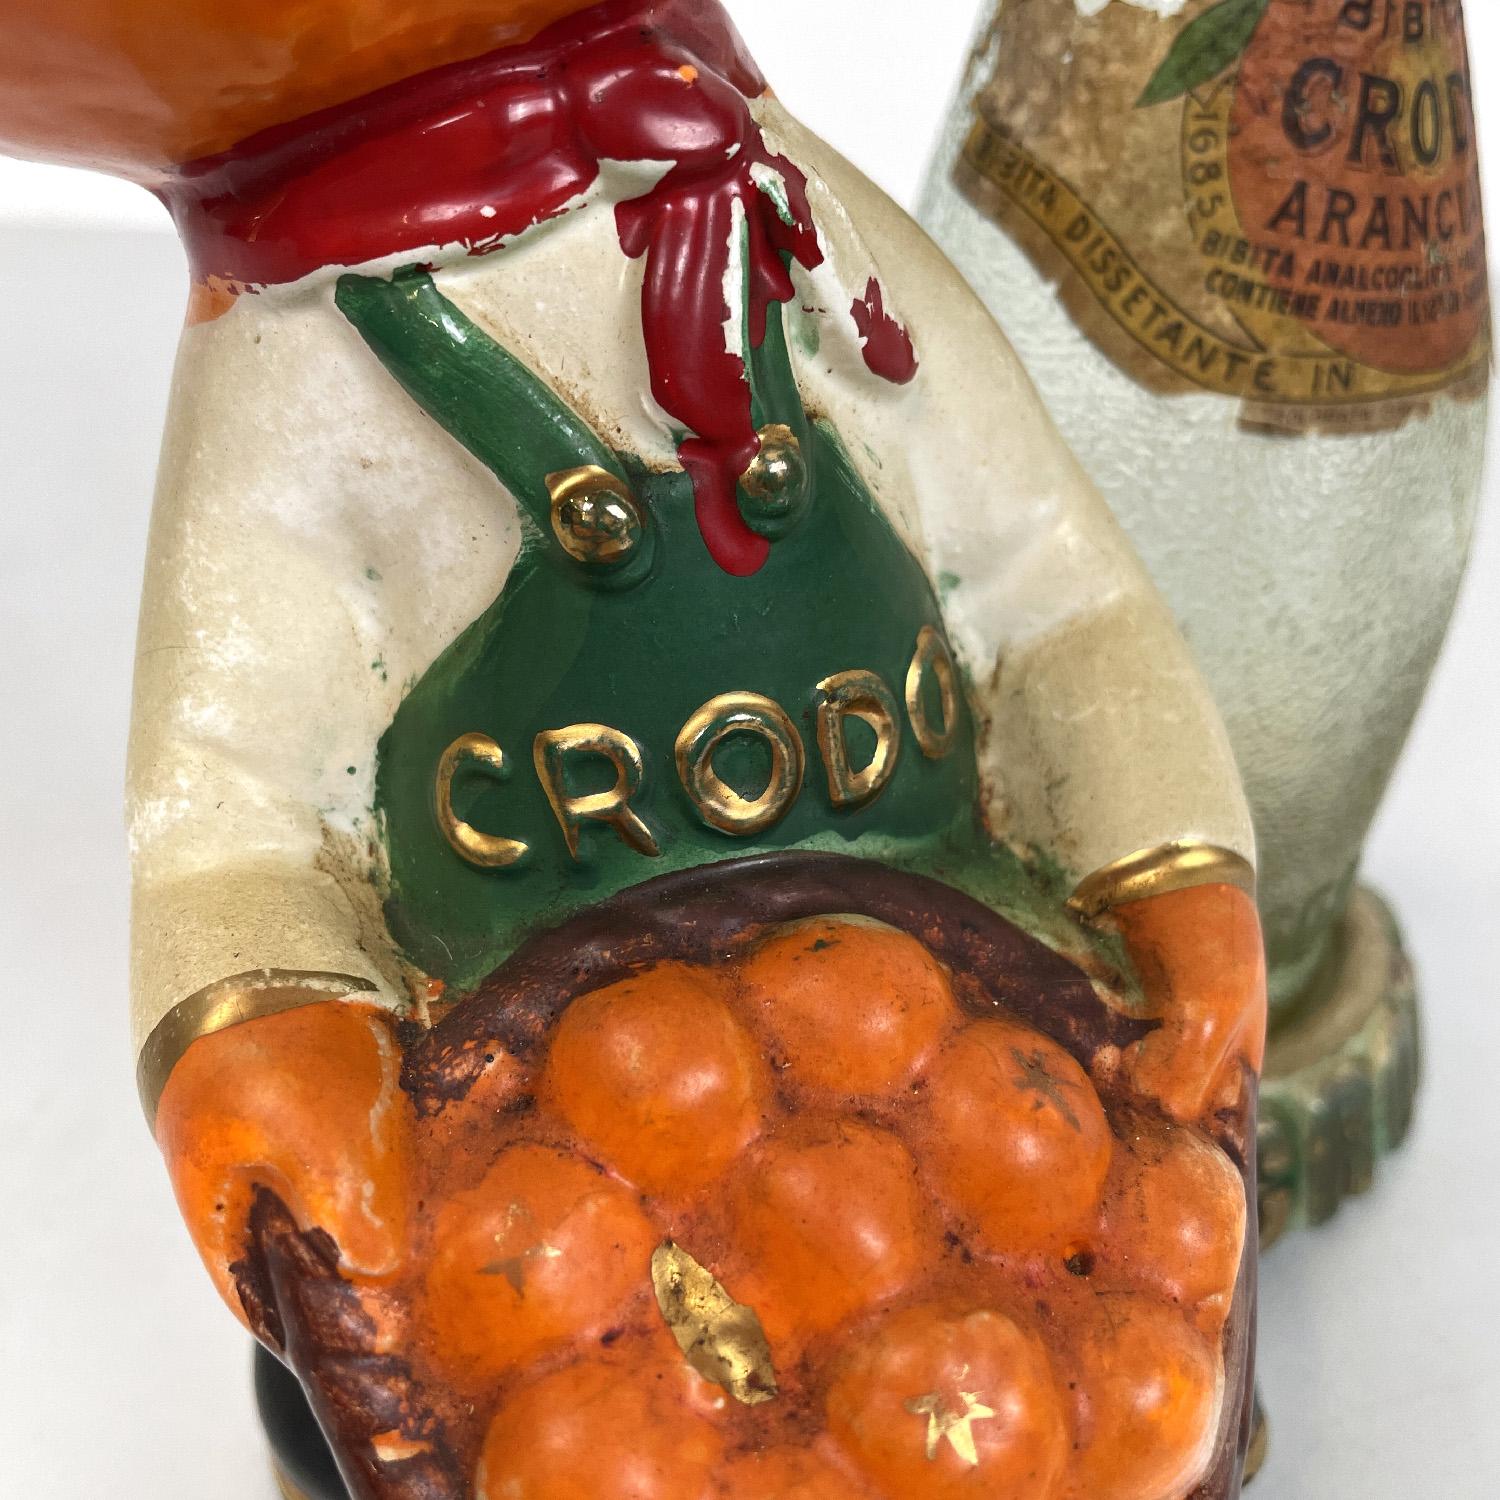 Italian mid-century modern Crodo advertising sculpture with glass bottle, 1960s For Sale 2